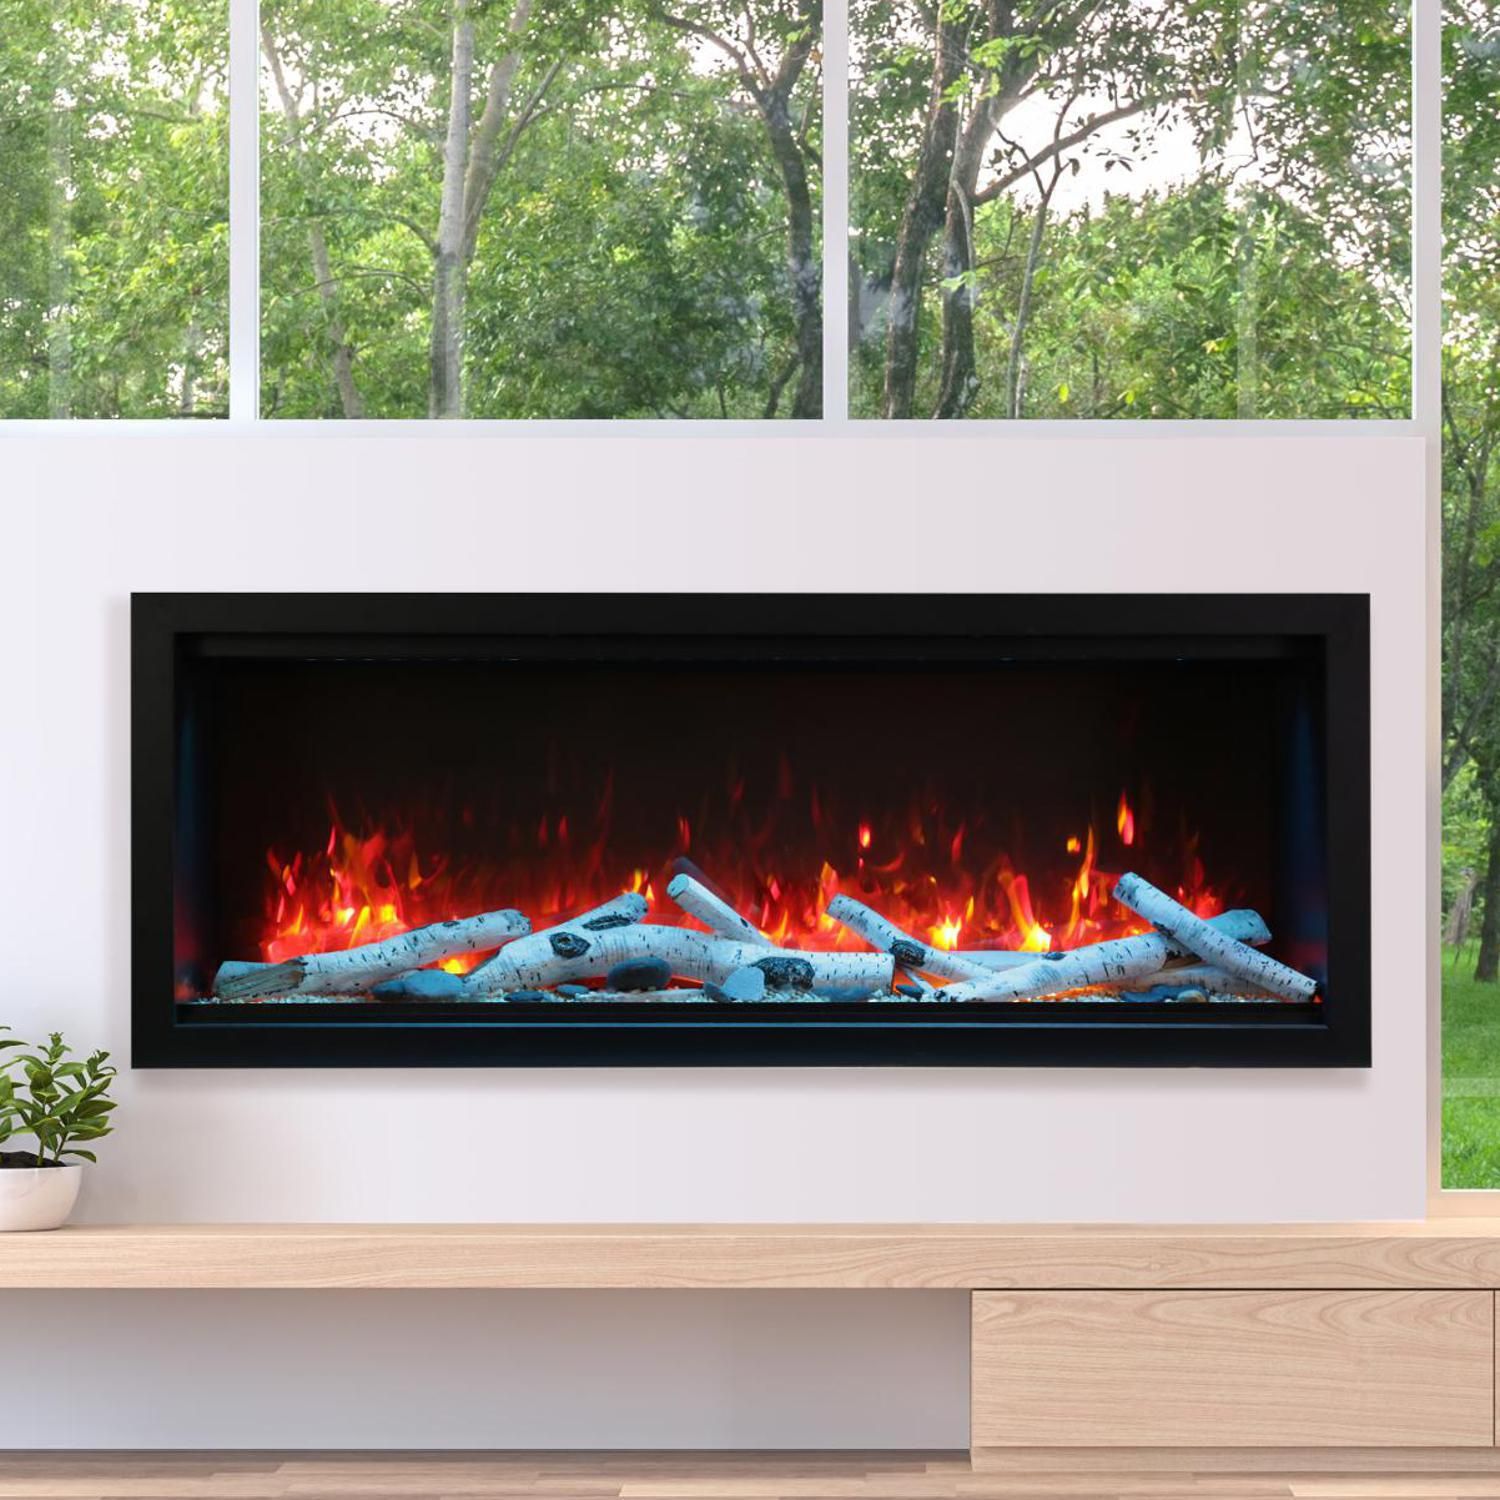 Led Fireplace Wall Mount Fresh Amantii Symmetry Series Extra Tall 60" Built In Electric